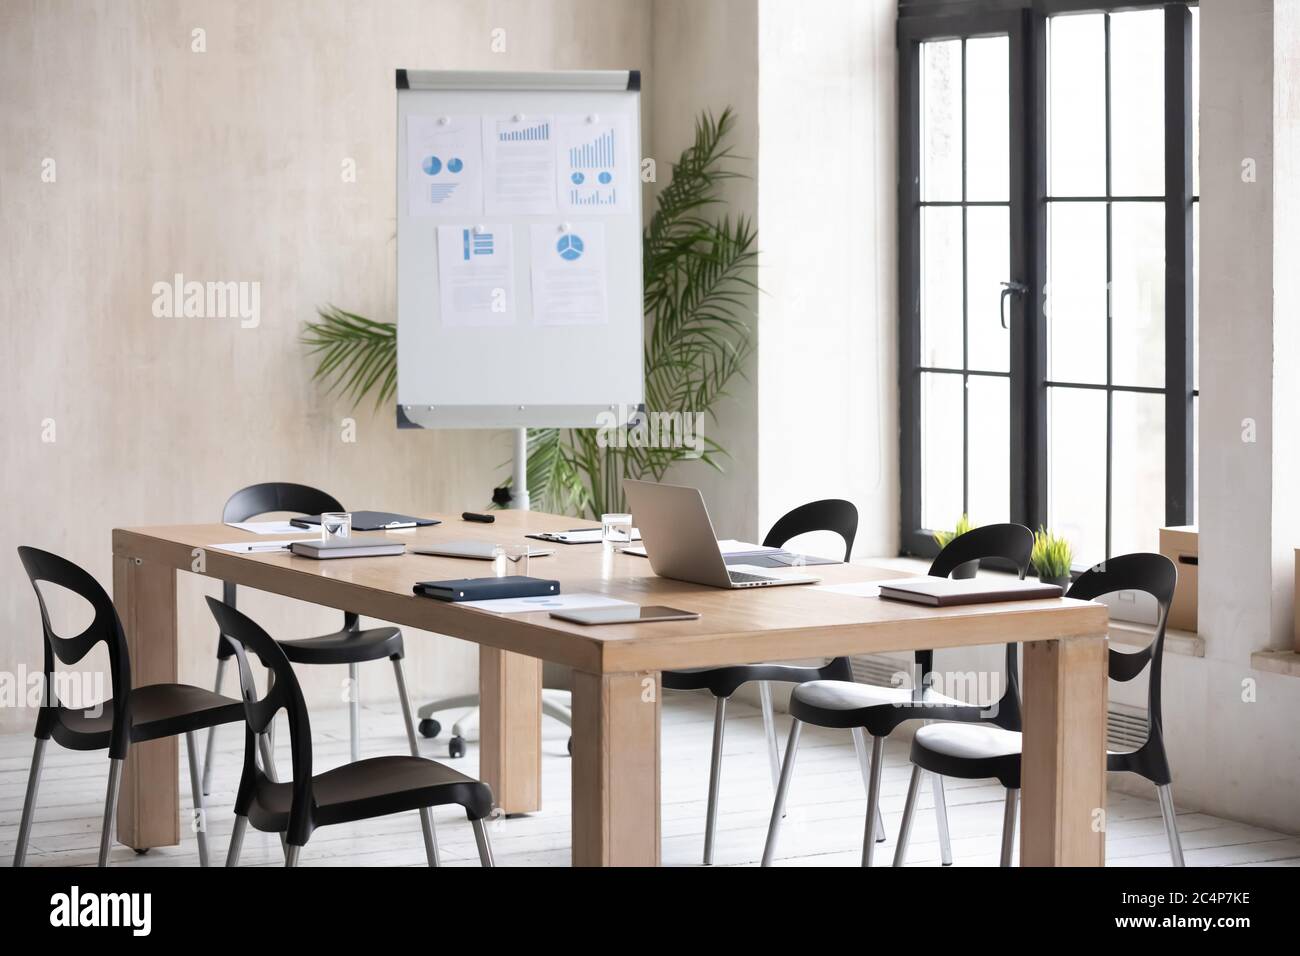 Modern office boardroom with flip chart and conference table Stock Photo